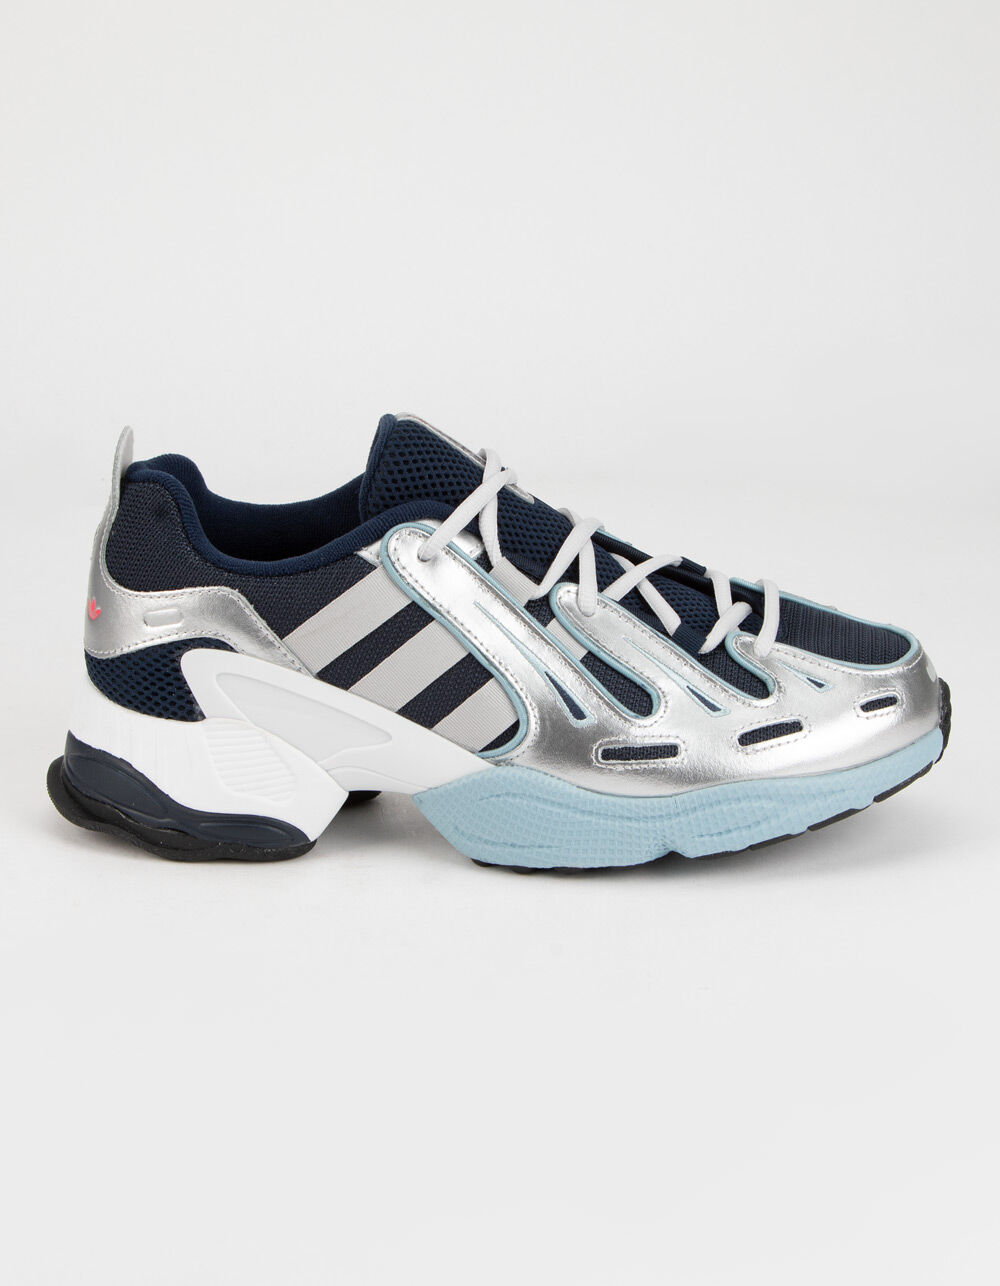 ADIDAS EQT Gazelle Navy & Silver Shoes - NAVCO | Tillys